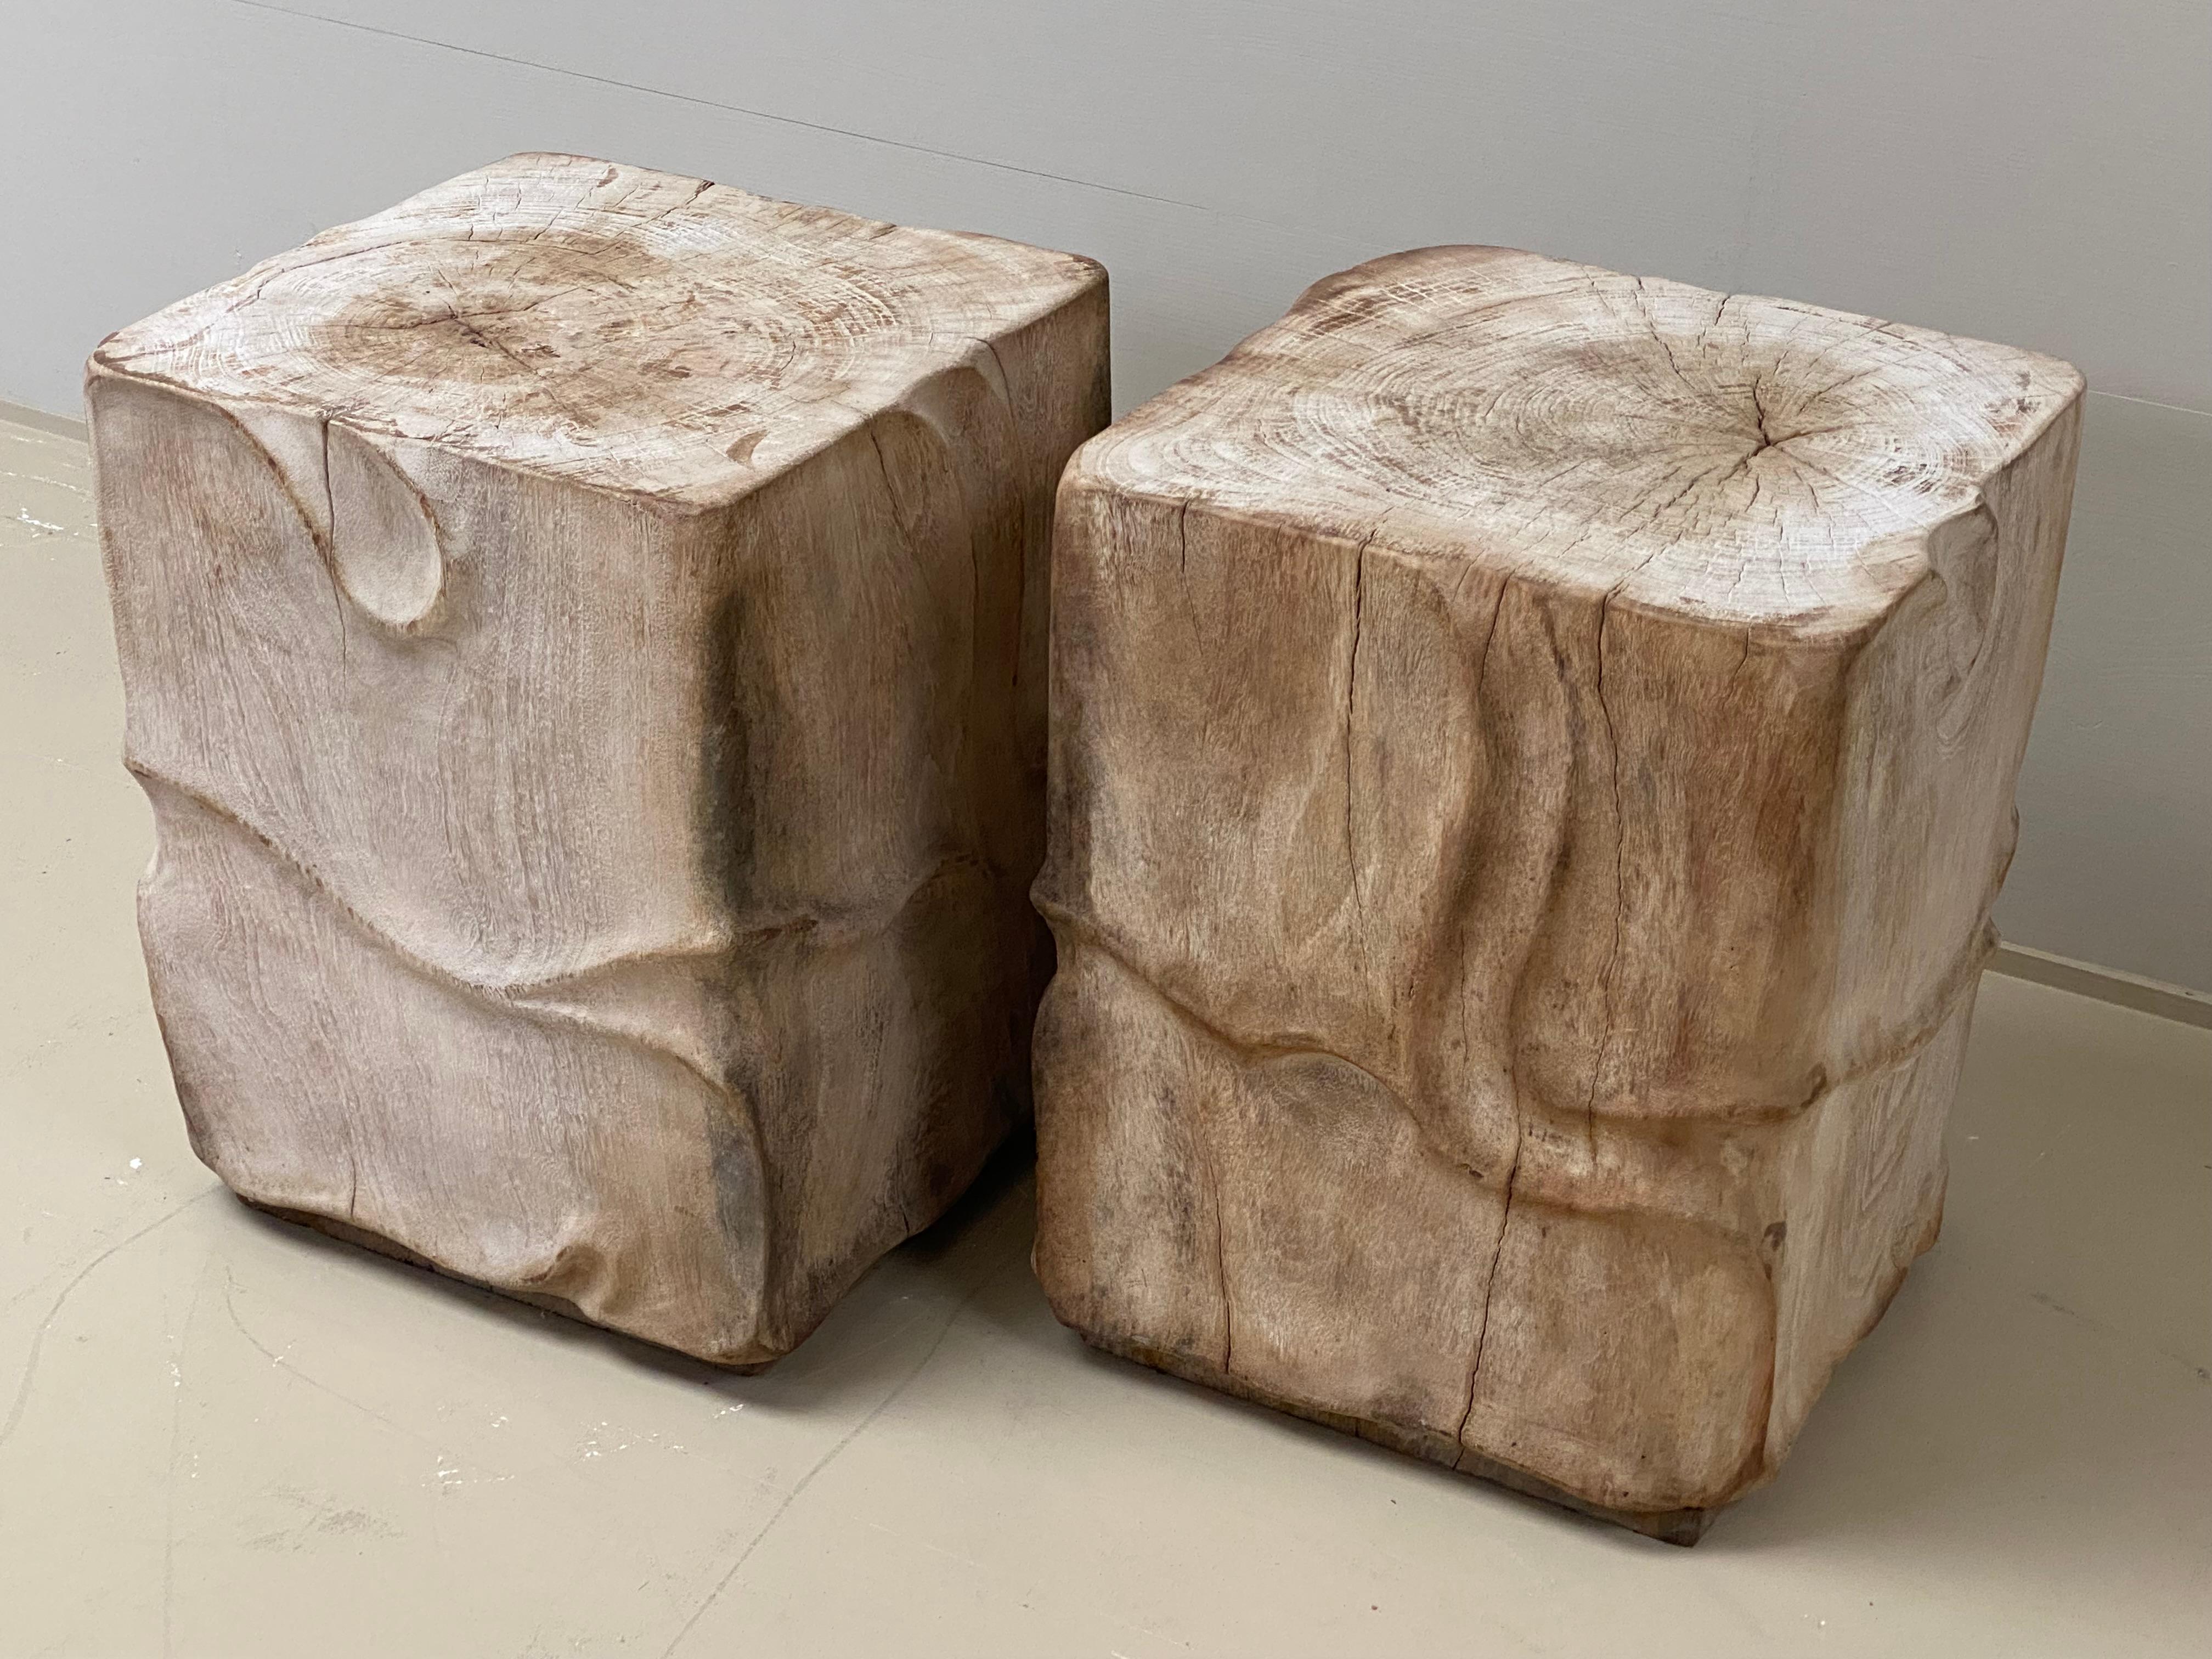 Indonesian Pair of Wooden, Brutalist Side Side Tables - Rustic Wooden Stools.